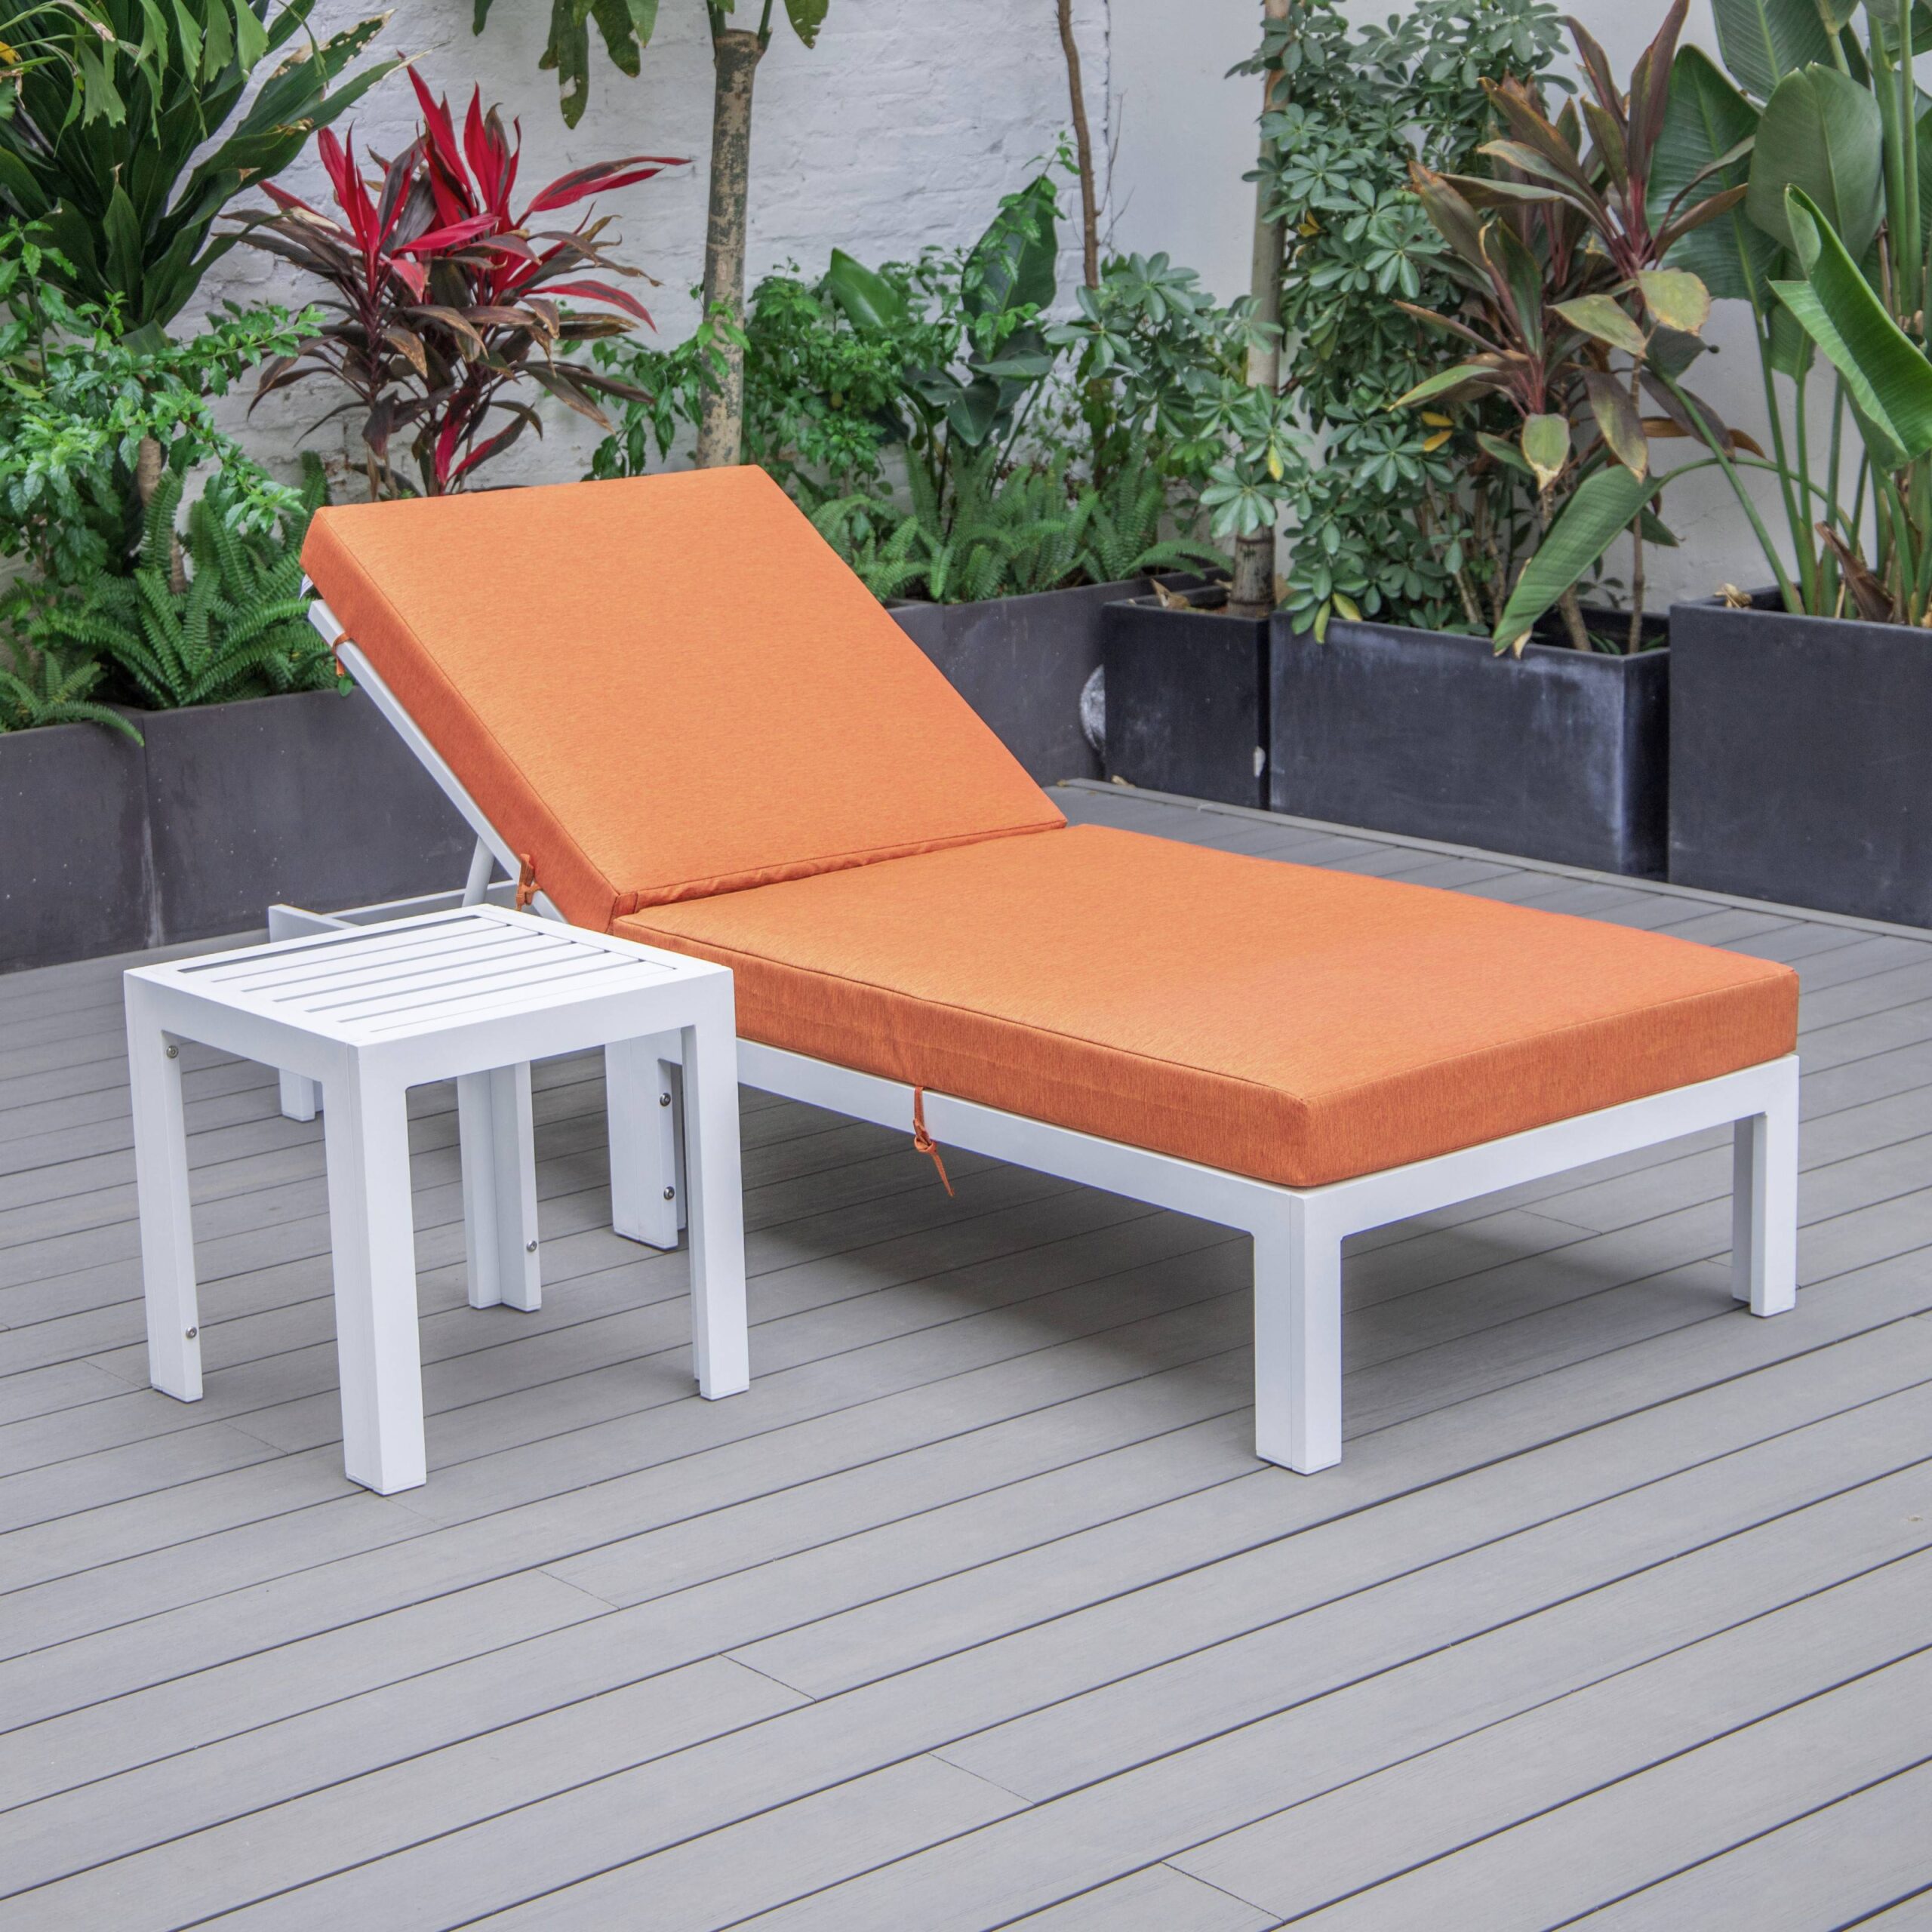 LeisureMod Chelsea Modern White Aluminum Outdoor Chaise Lounge Chair With Side Table & Orange Cushions - image 2 of 13